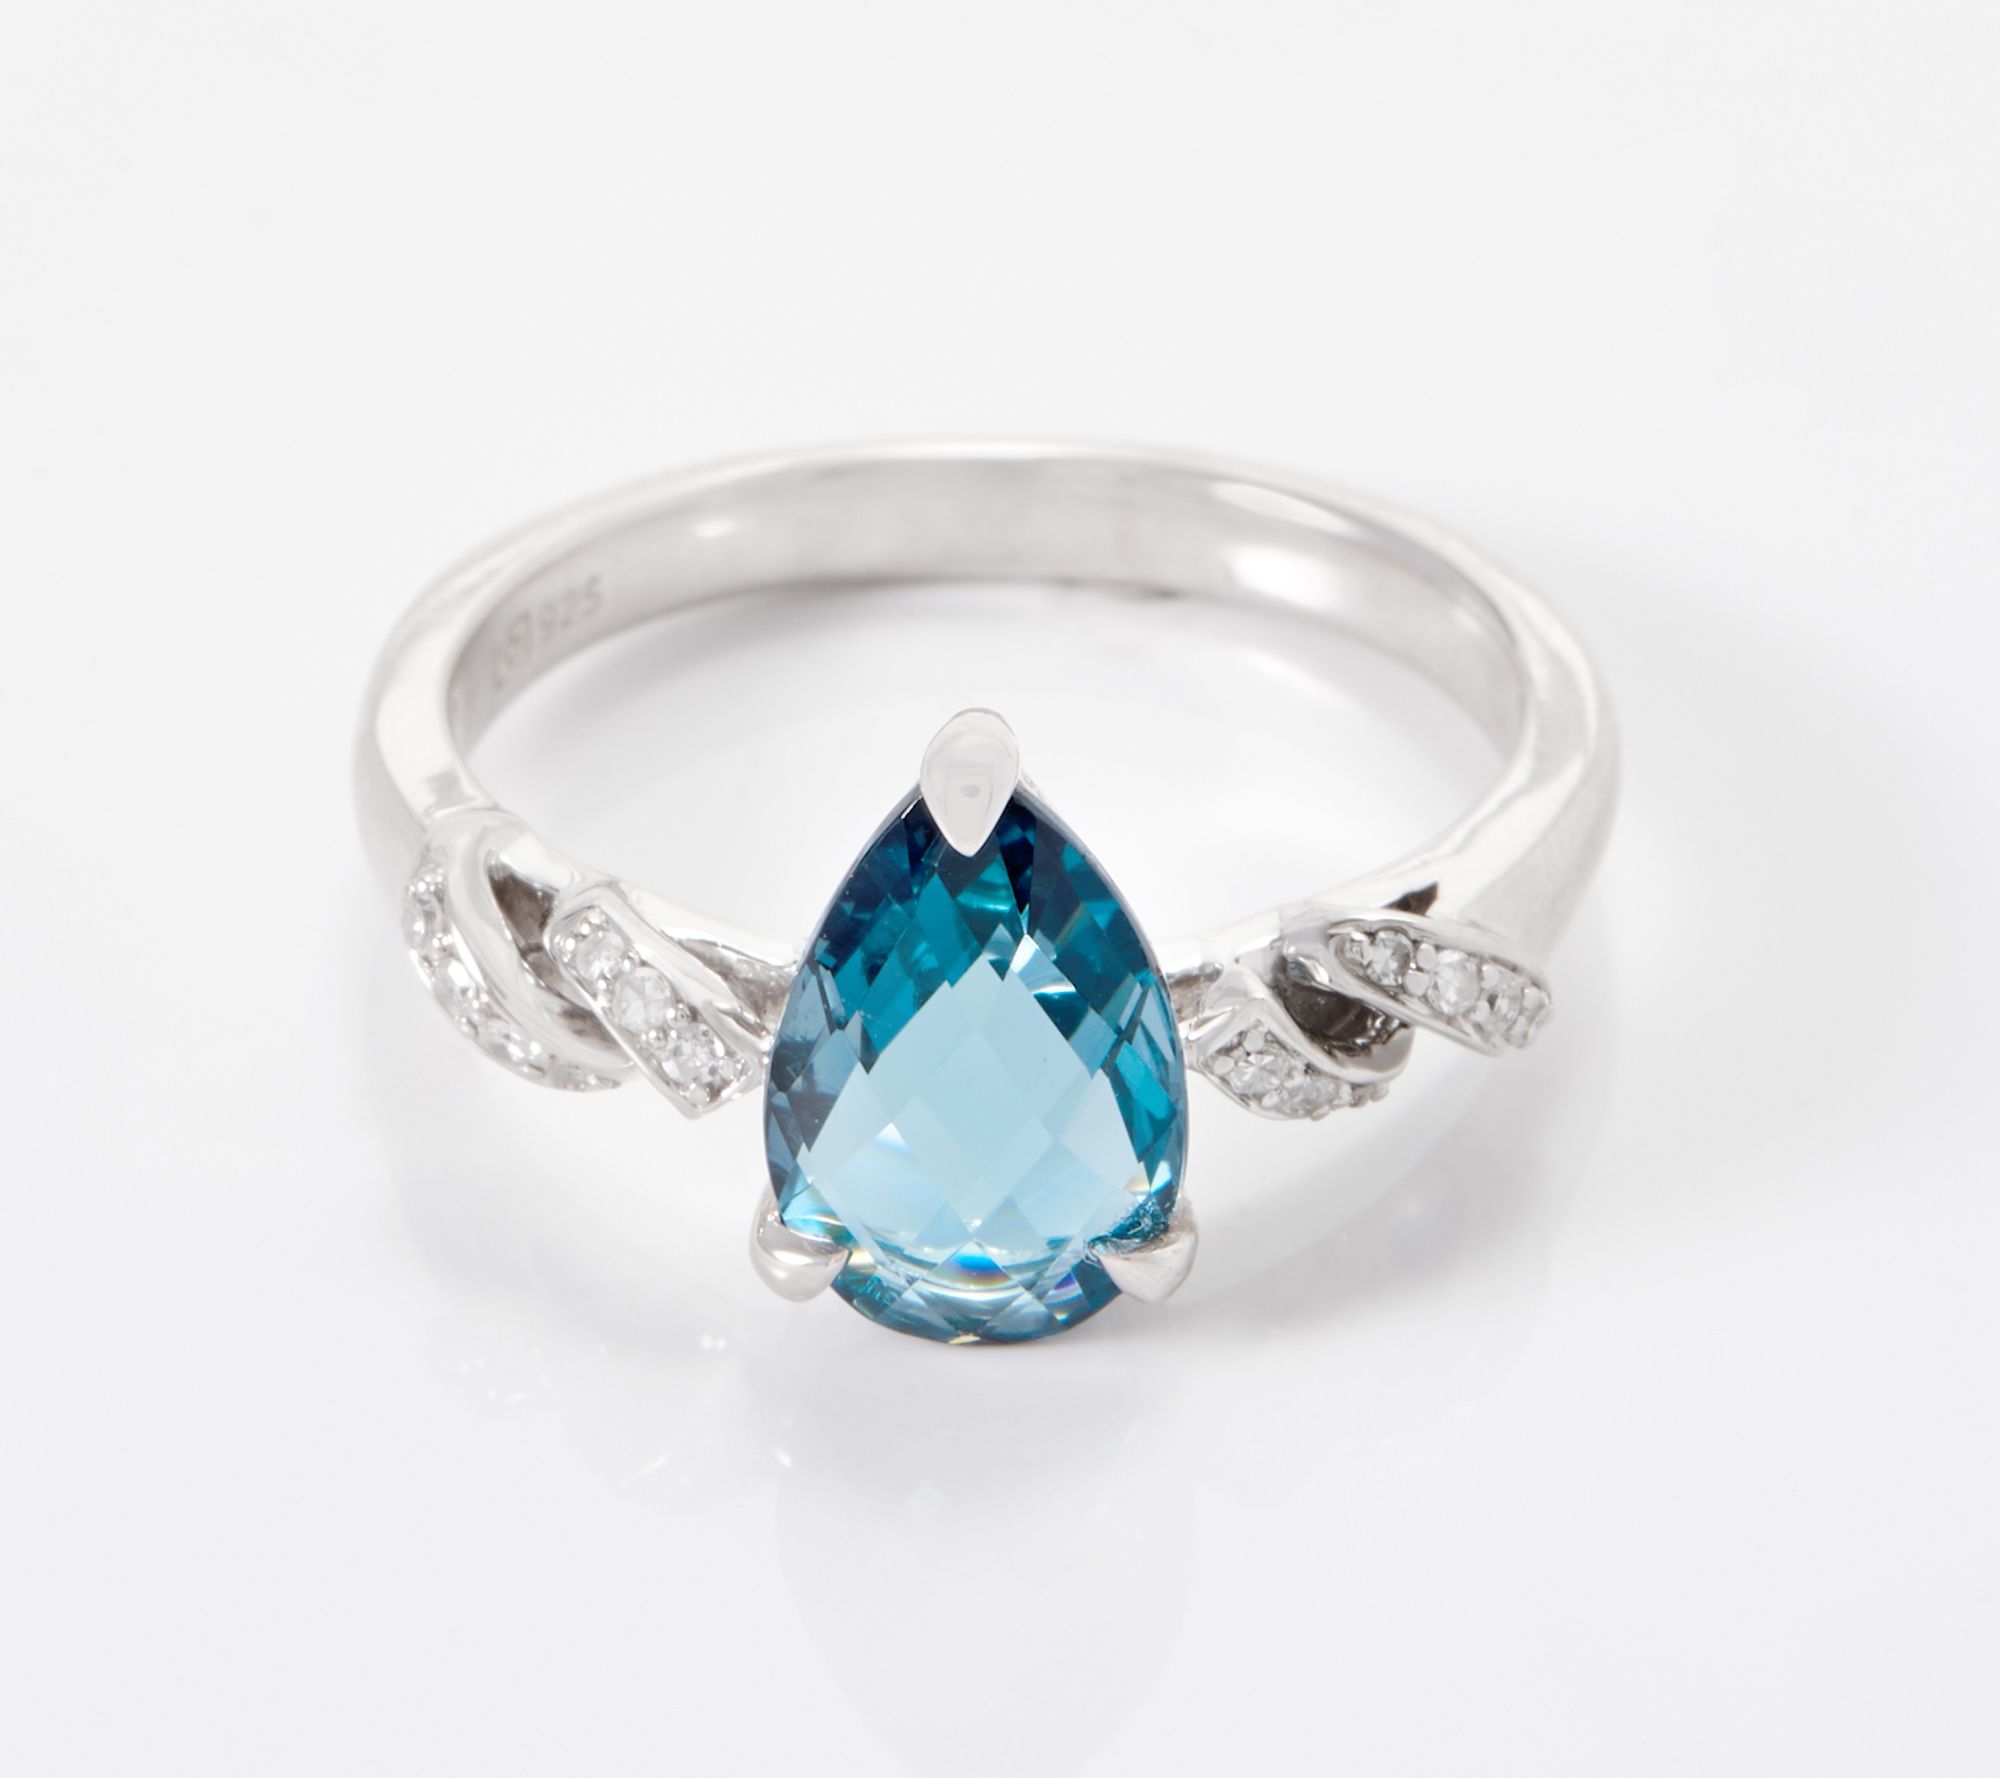 Jewels By Lux Sterling Silver w/14K Gold Blue Topaz Ring 